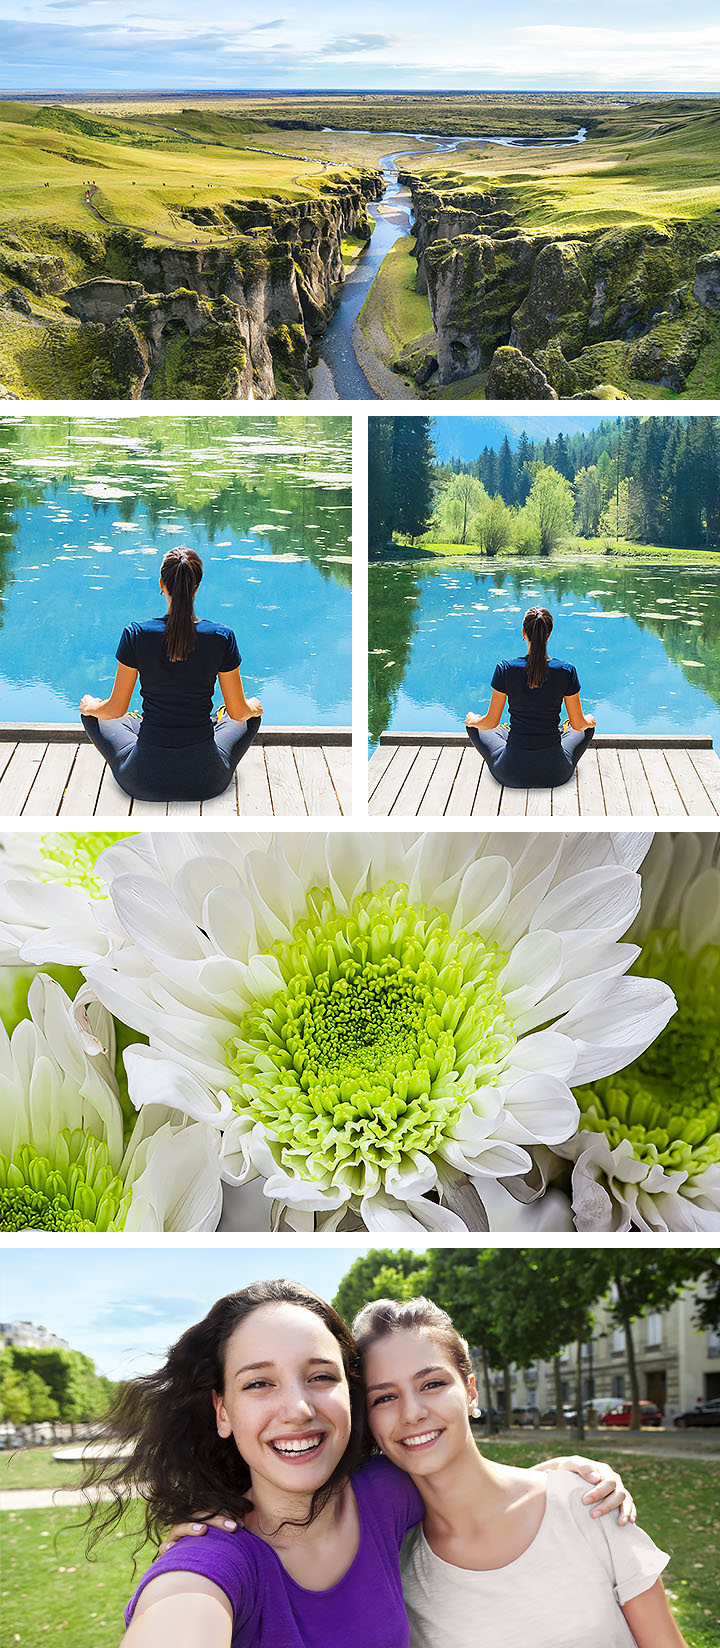 Five images are shown, each image highlighting what each camera is capable of. A beautiful landscape of a river flowing through a valley was taken by the 50MP Main camera. A portrait of a woman sitting, meditating at a dock by the waters, dressed in black and turned around, is shown twice with one image showing a wider angle to highlight the 5MP Ultra Wide camera. A detailed image of a single white flower was taken by the 2MP Macro camera. A selfie of two smiling women was taken by the 13MP Front camera.